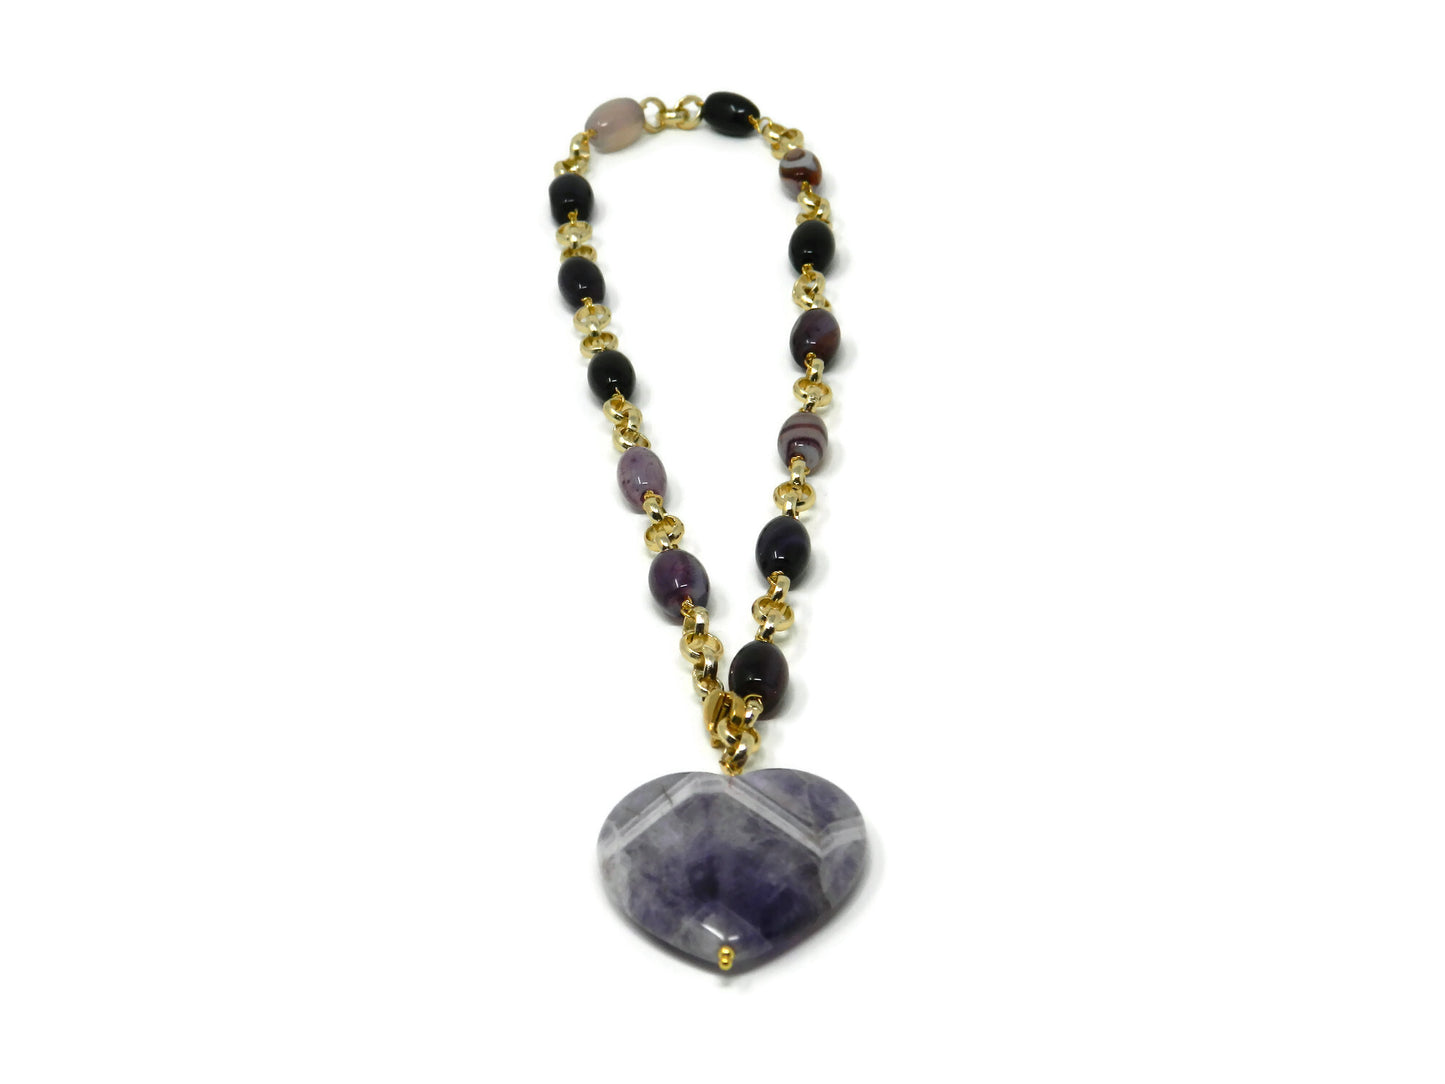 Choker Necklace with Purple Amethyst Heart